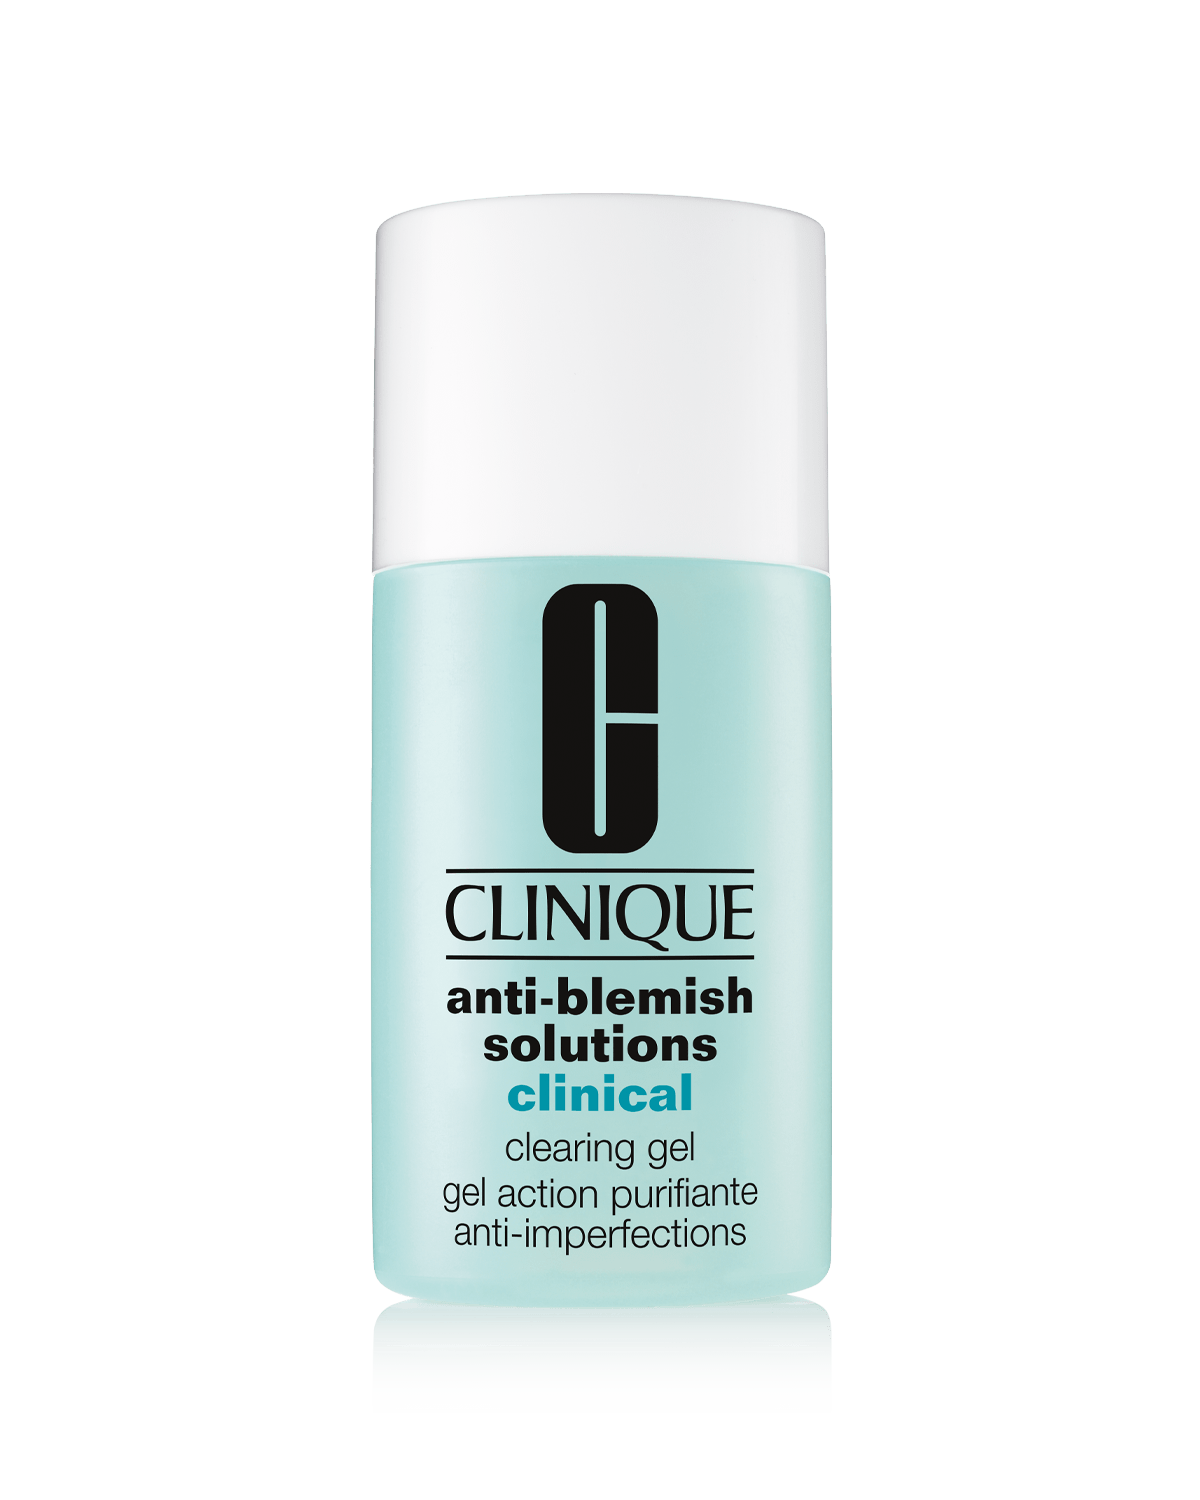 Anti-blemish Solutions Clinical clearing gel